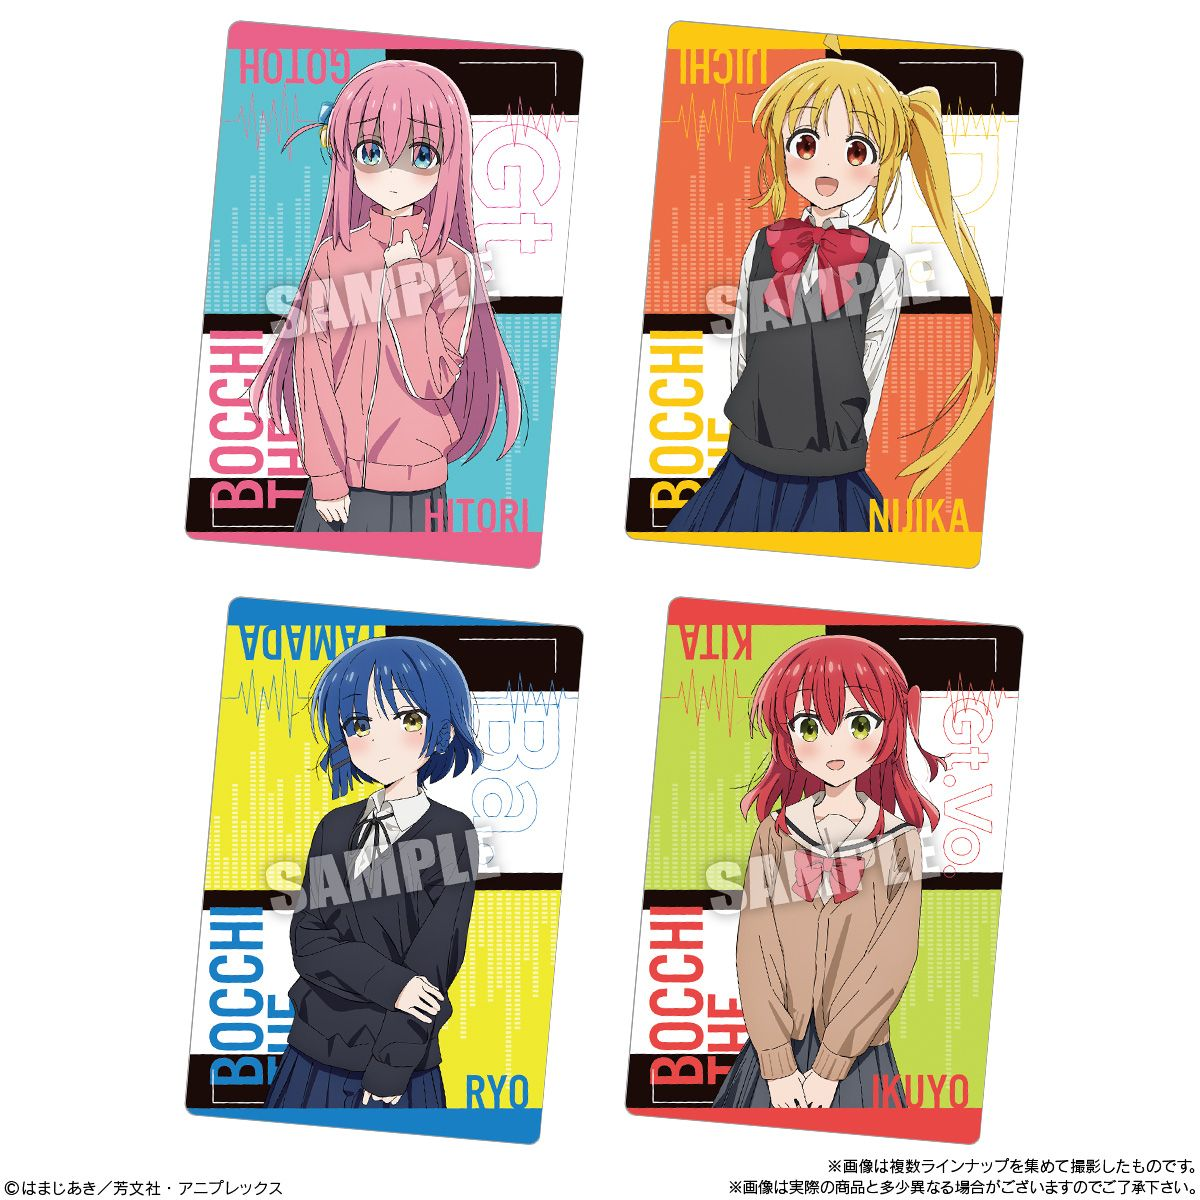 Bocchi The Rock! Metallic Card Collection Wafers-Single Pack (Random)-Bandai-Ace Cards &amp; Collectibles